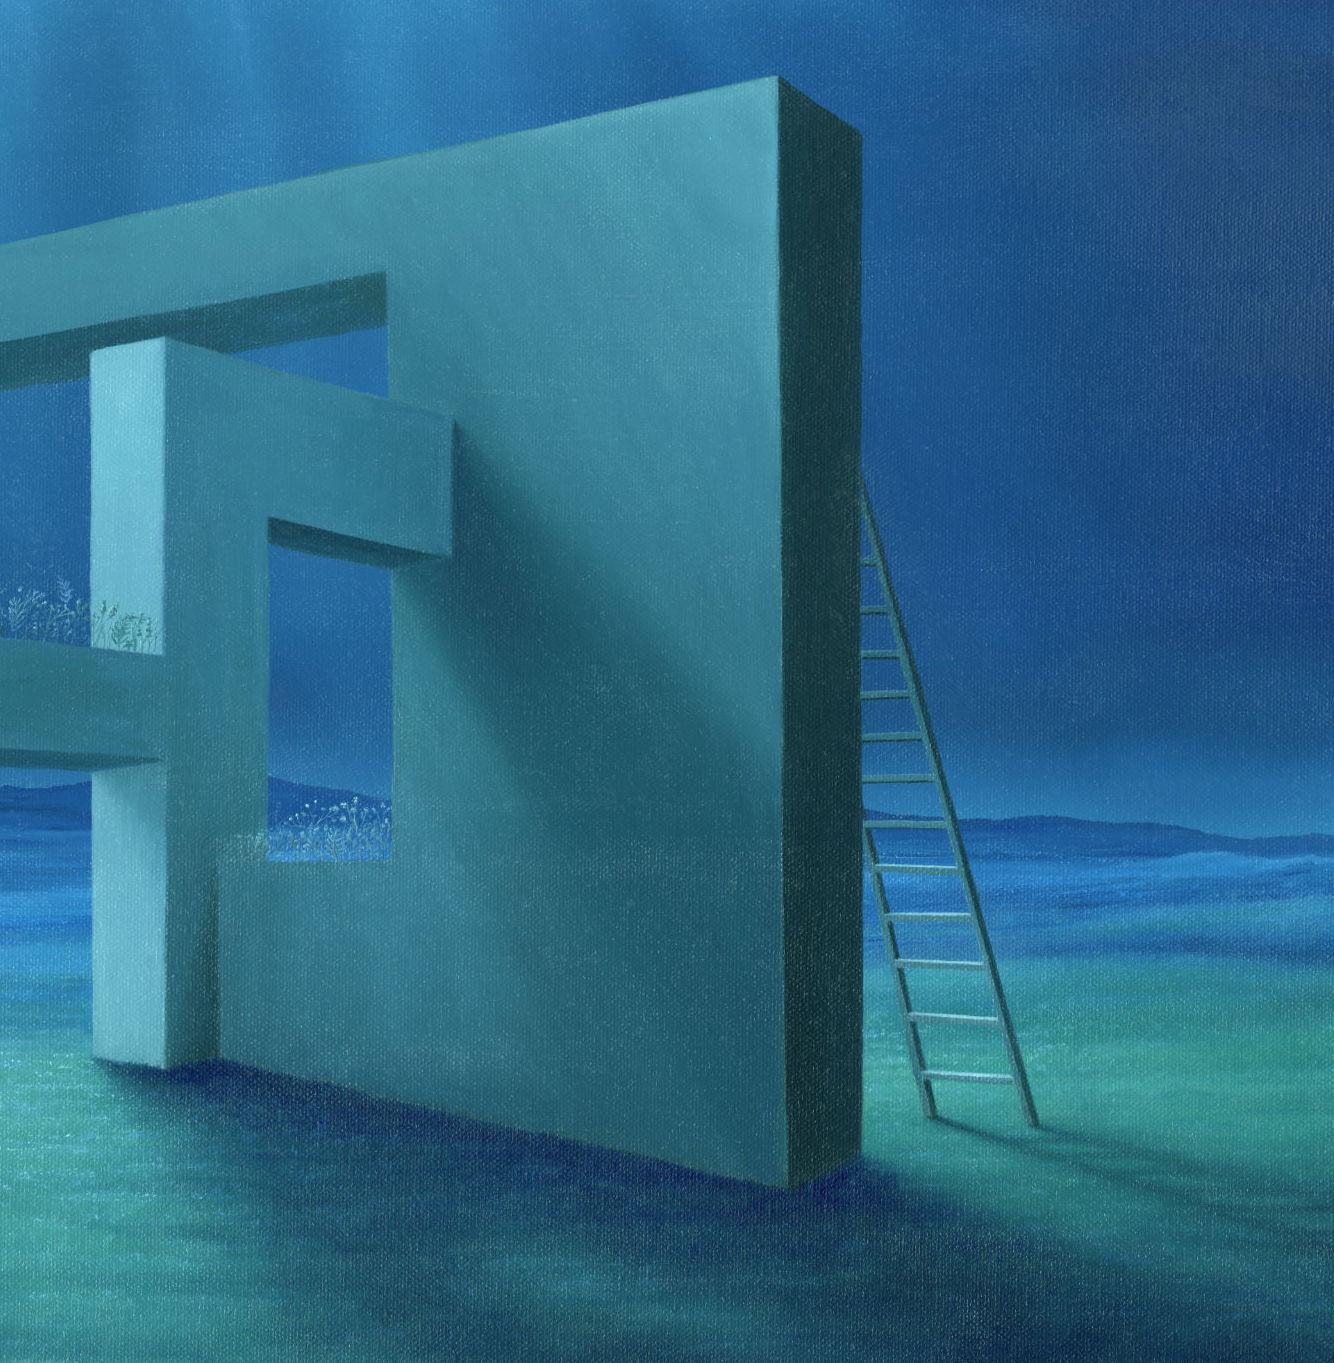 Impossible Walls, Original Contemporary Surrealist Blue Painting, 2022
24